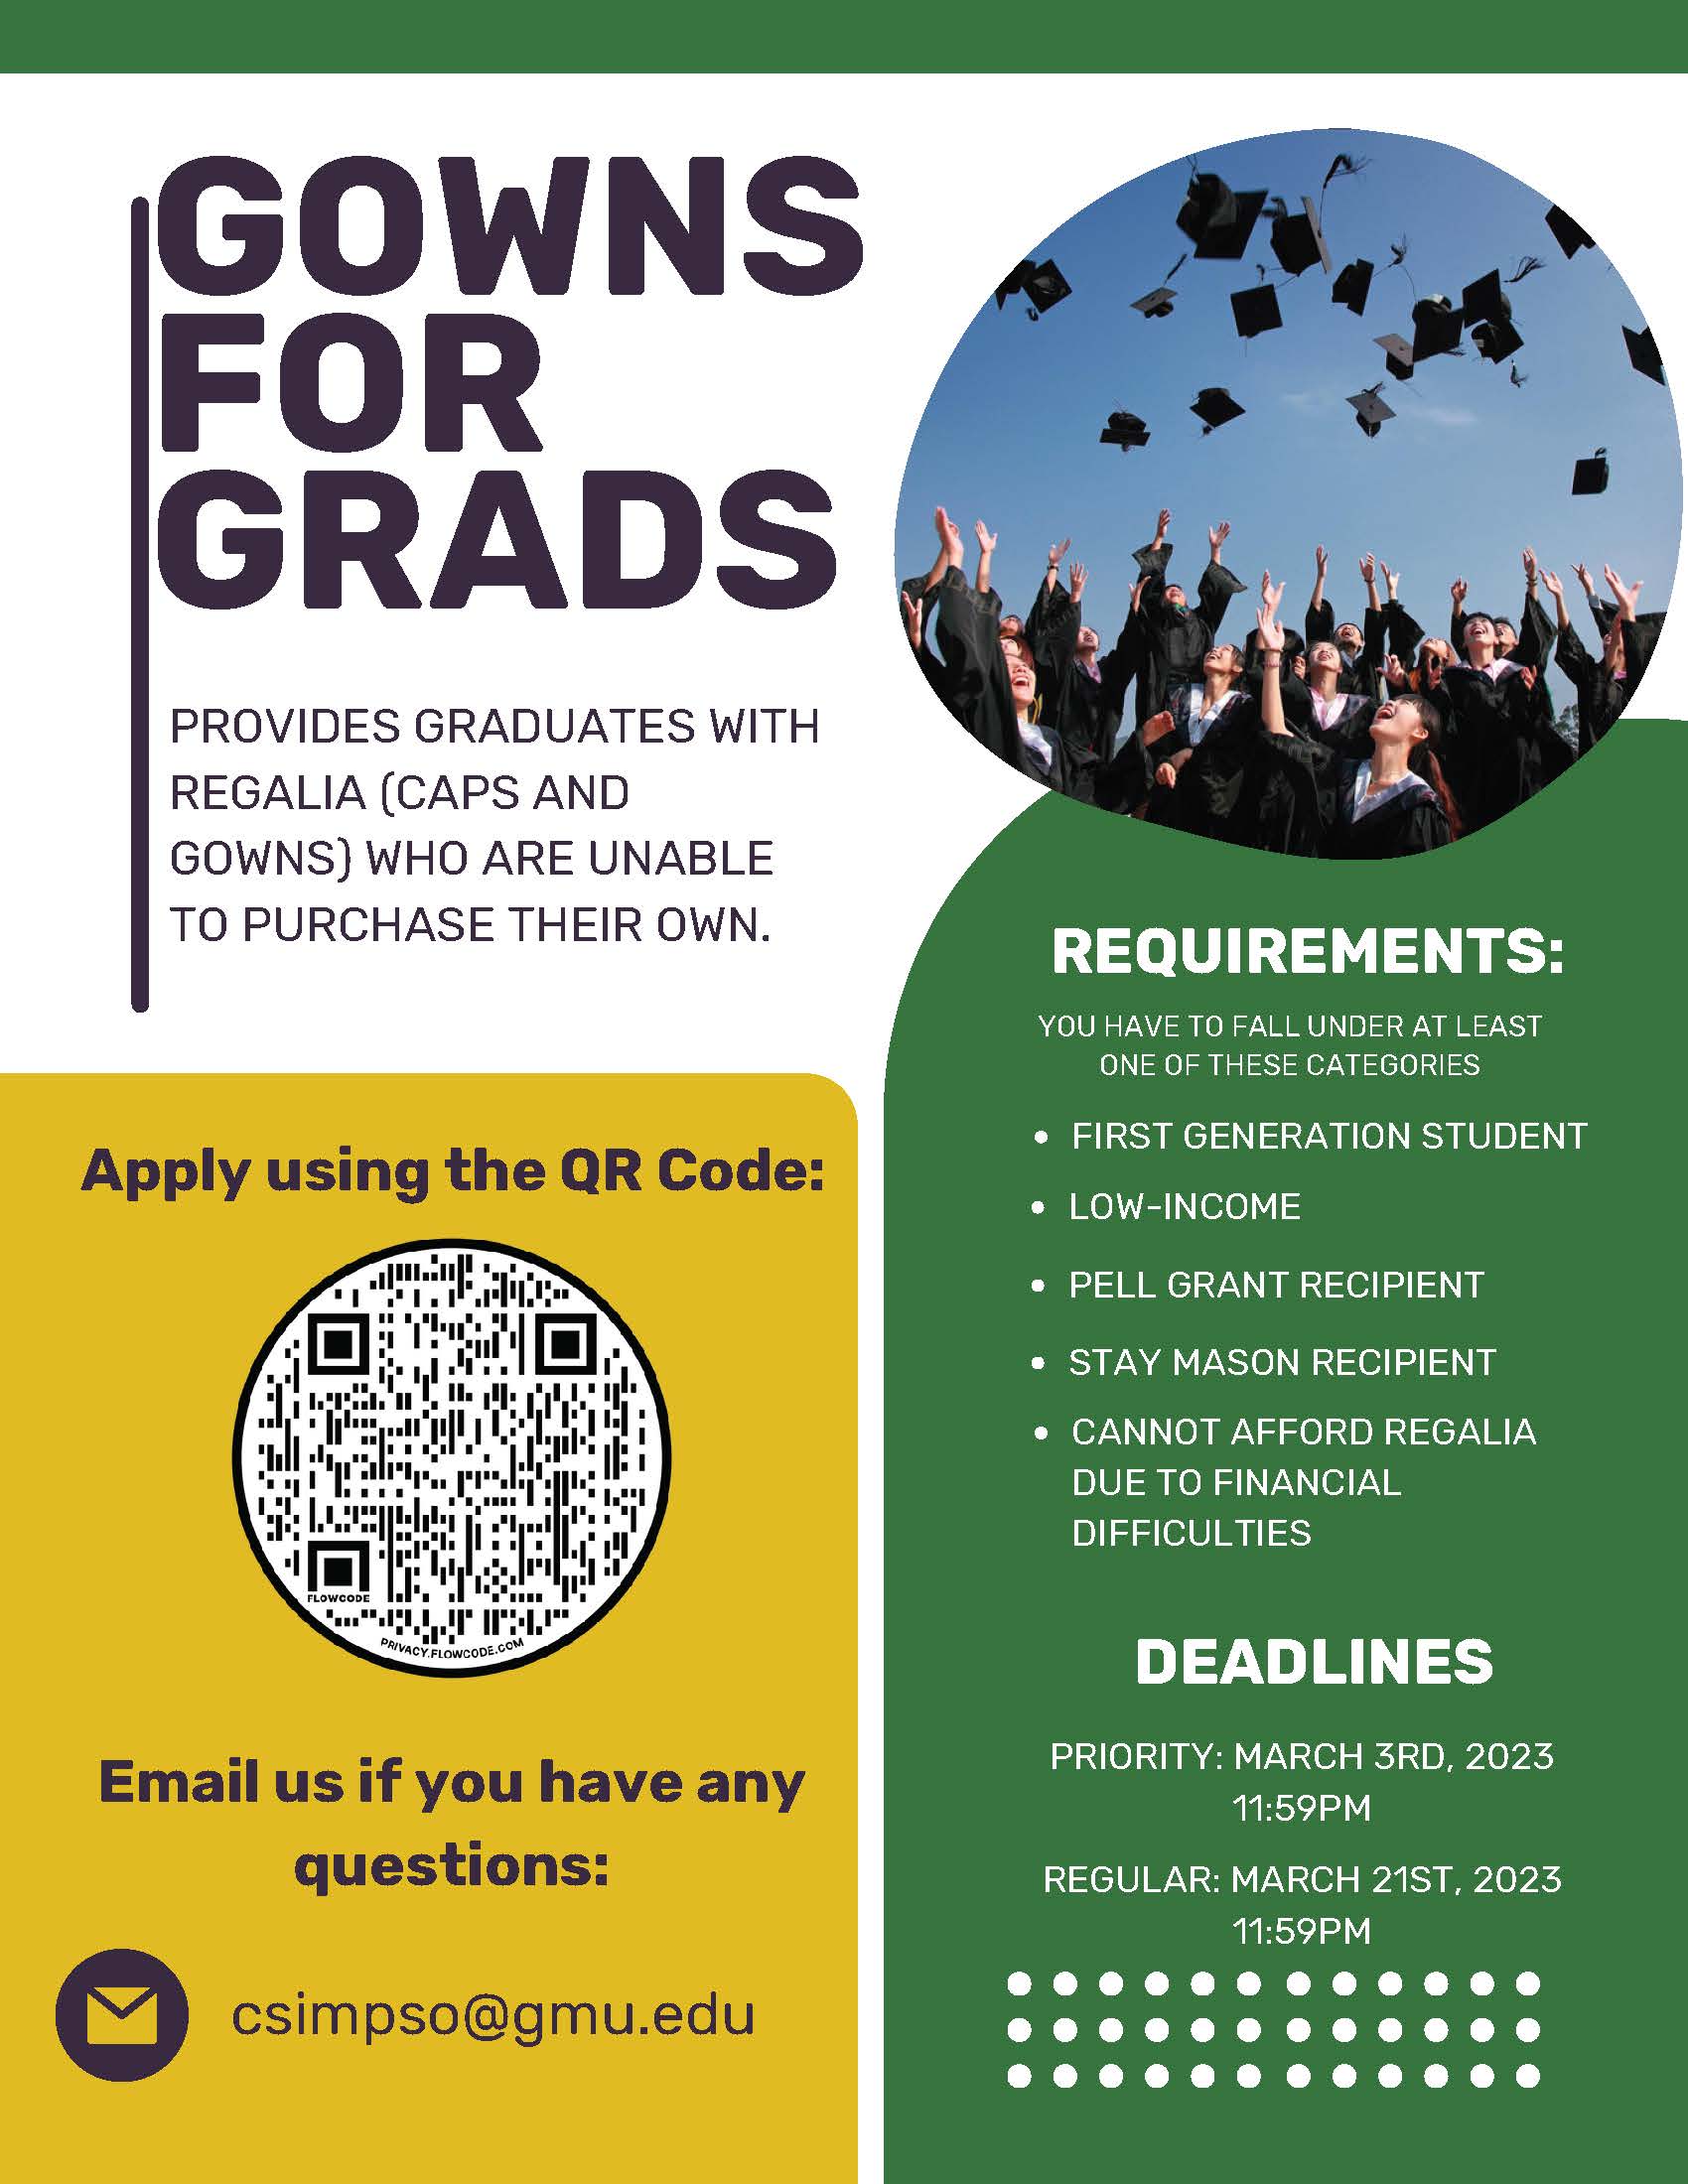 Gowns for Grads Spring 2023 Lending Program provides graduates with regalia (caps and gowns) who are unable to purchase their own. Priority Deadline: March 3, 11:59pm. Regular Deadline: March 21, 11:59pm. Visit 